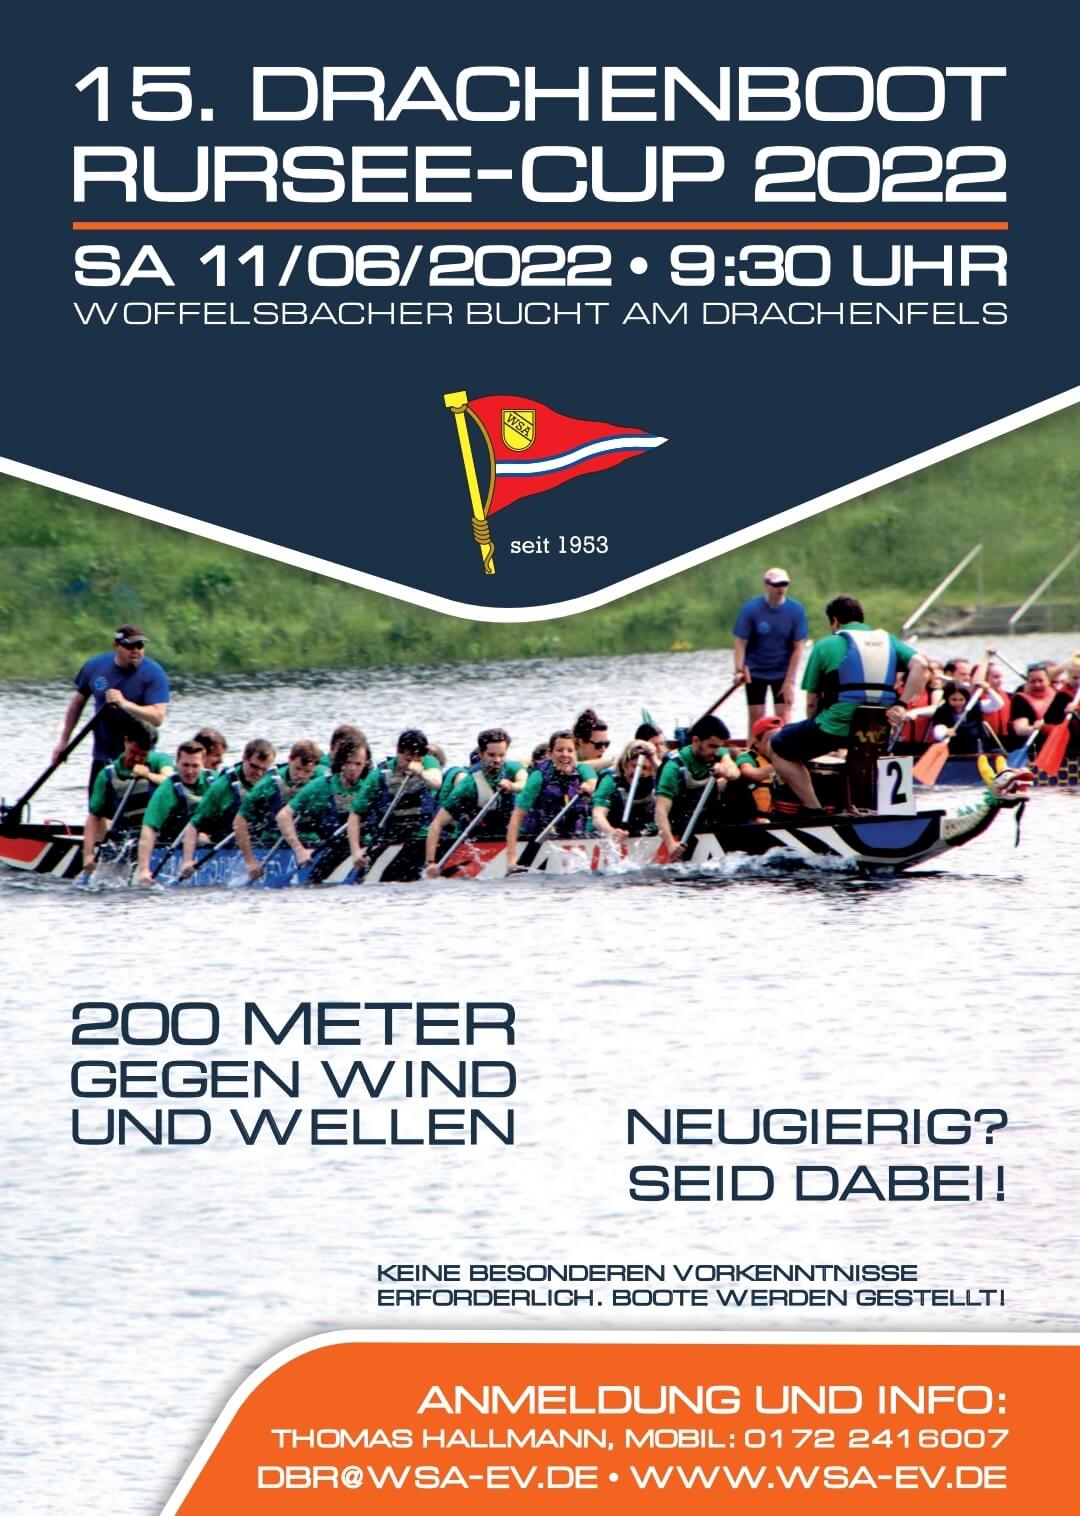 Drachenboot Rursee-Cup 2022